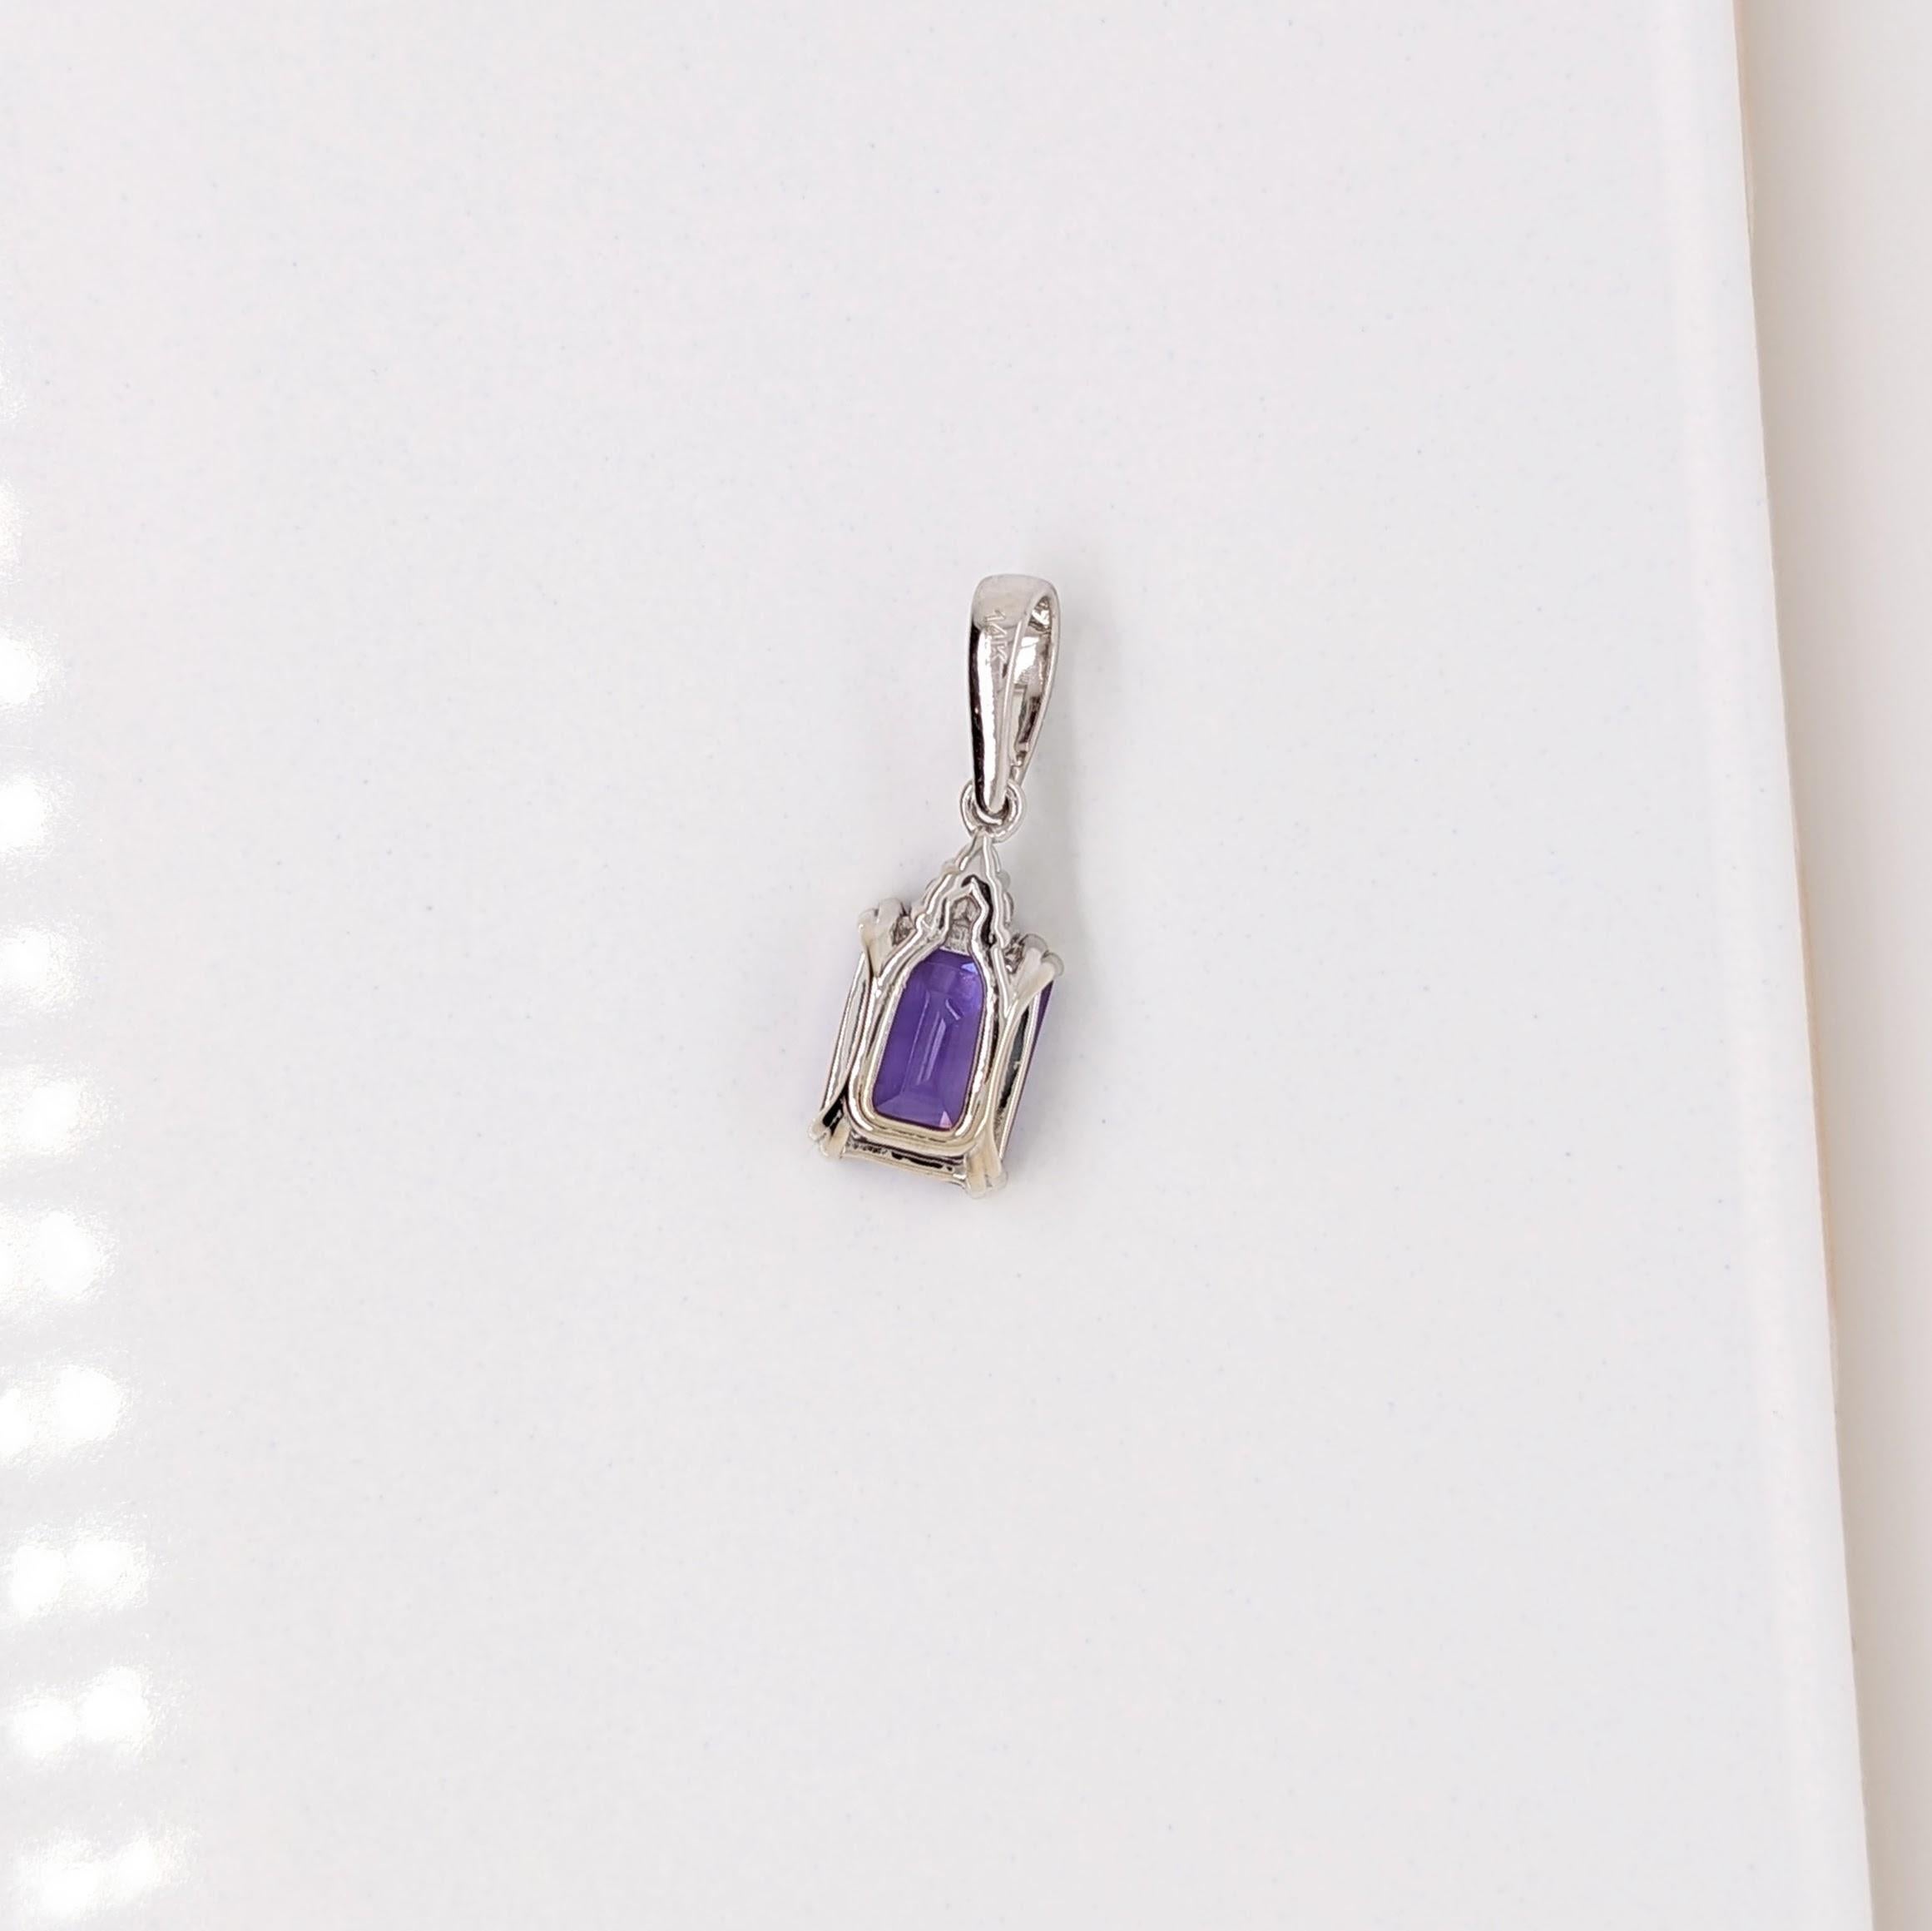 Modernist 1.99ct Amethyst Pendant w Diamond Accents in Solid 14K White Gold Oval 8x6mm For Sale